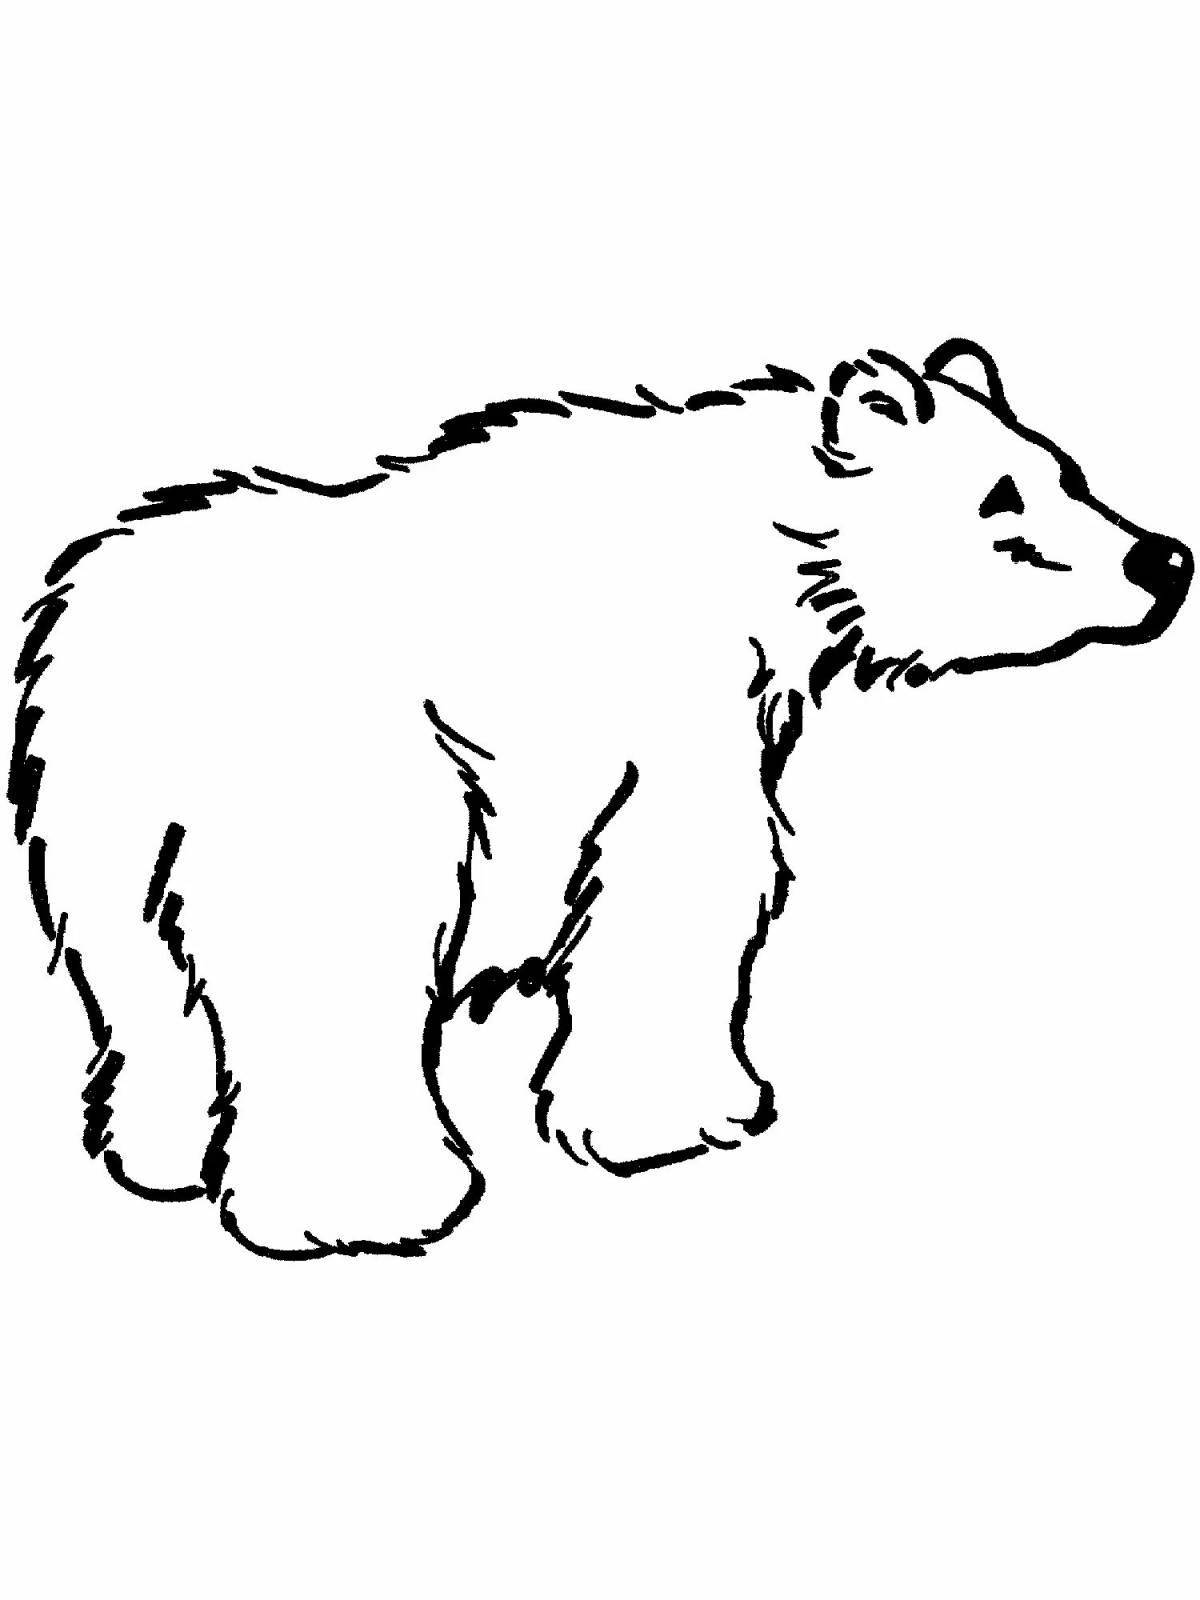 Wonderful polar bear coloring for children 5-6 years old